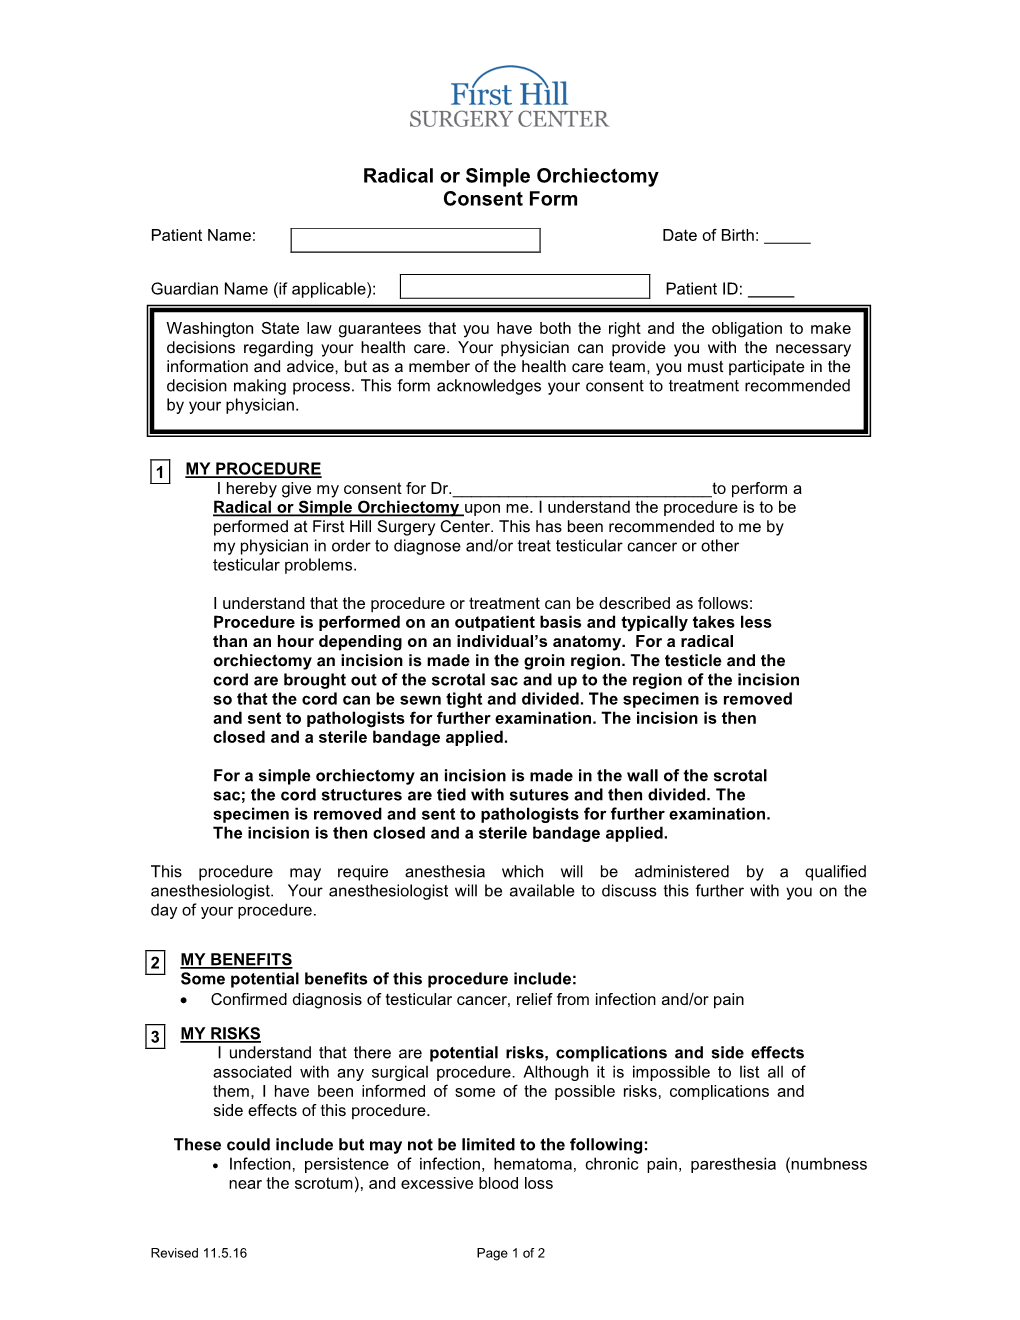 Radical Or Simple Orchiectomy Consent Form